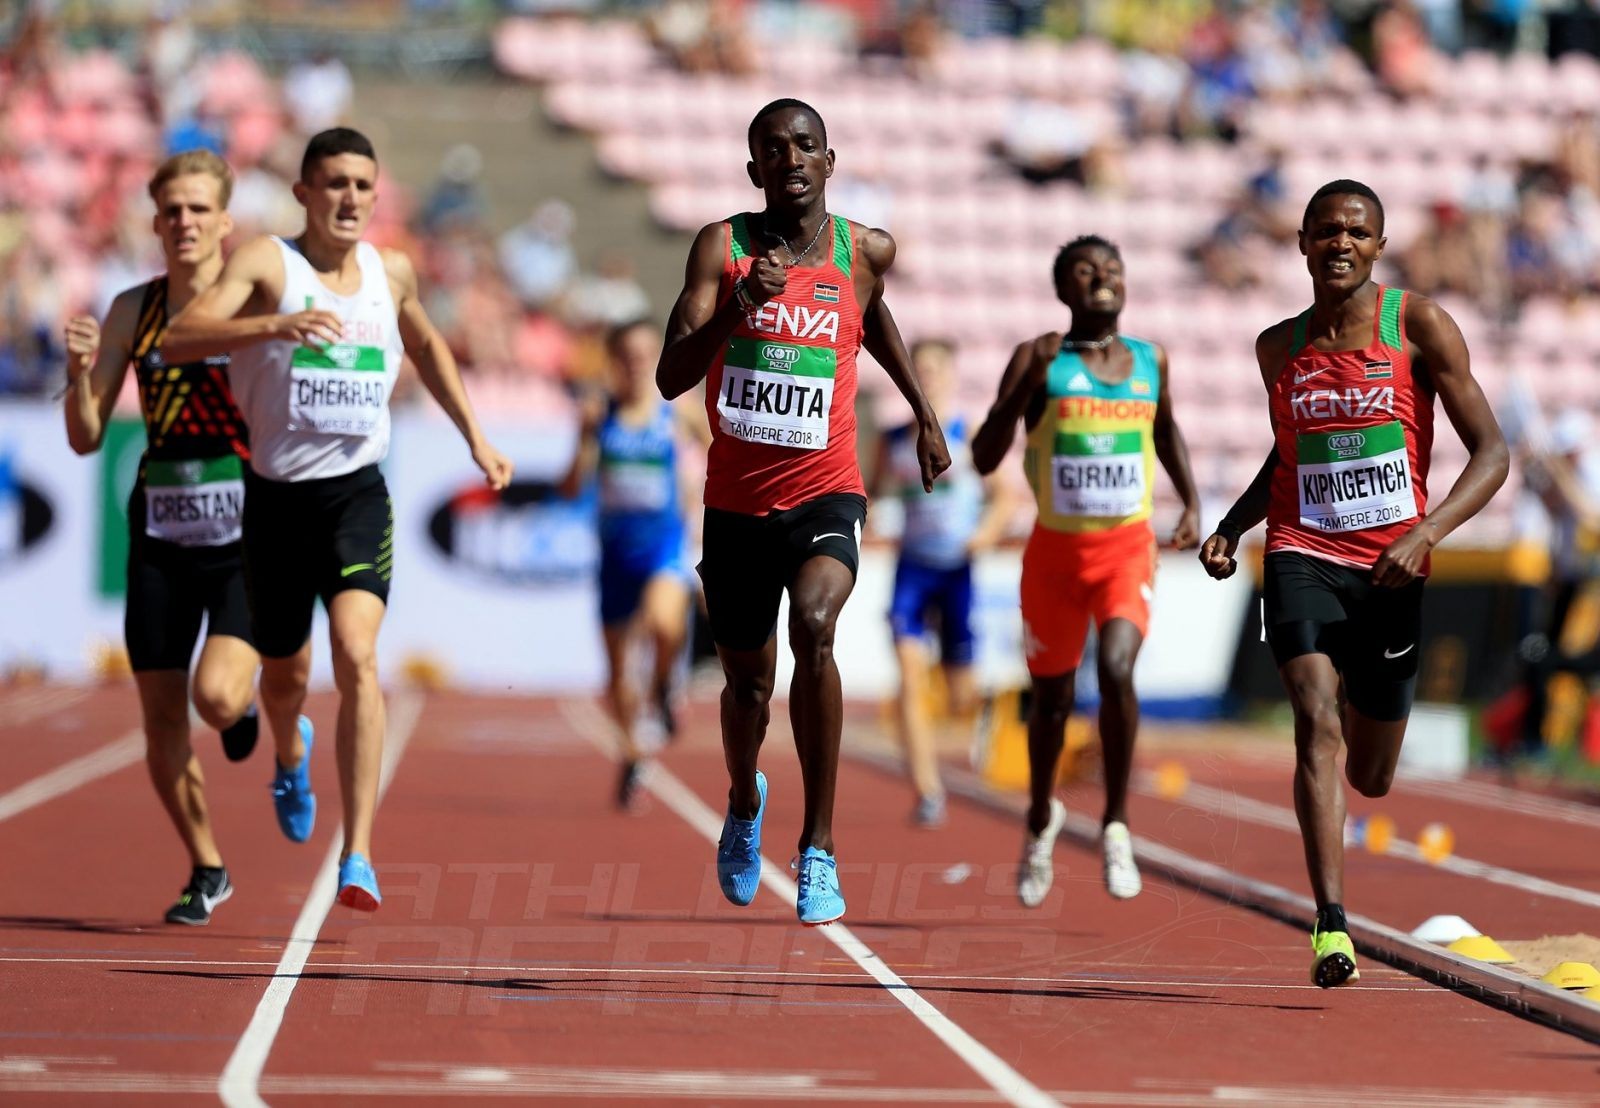 Solomon Lekuta sprints home to win the men's 800m gold for Kenya at the IAAF World U20 Championships Tampere 2018 / Photo Credit: Getty Images for IAAF